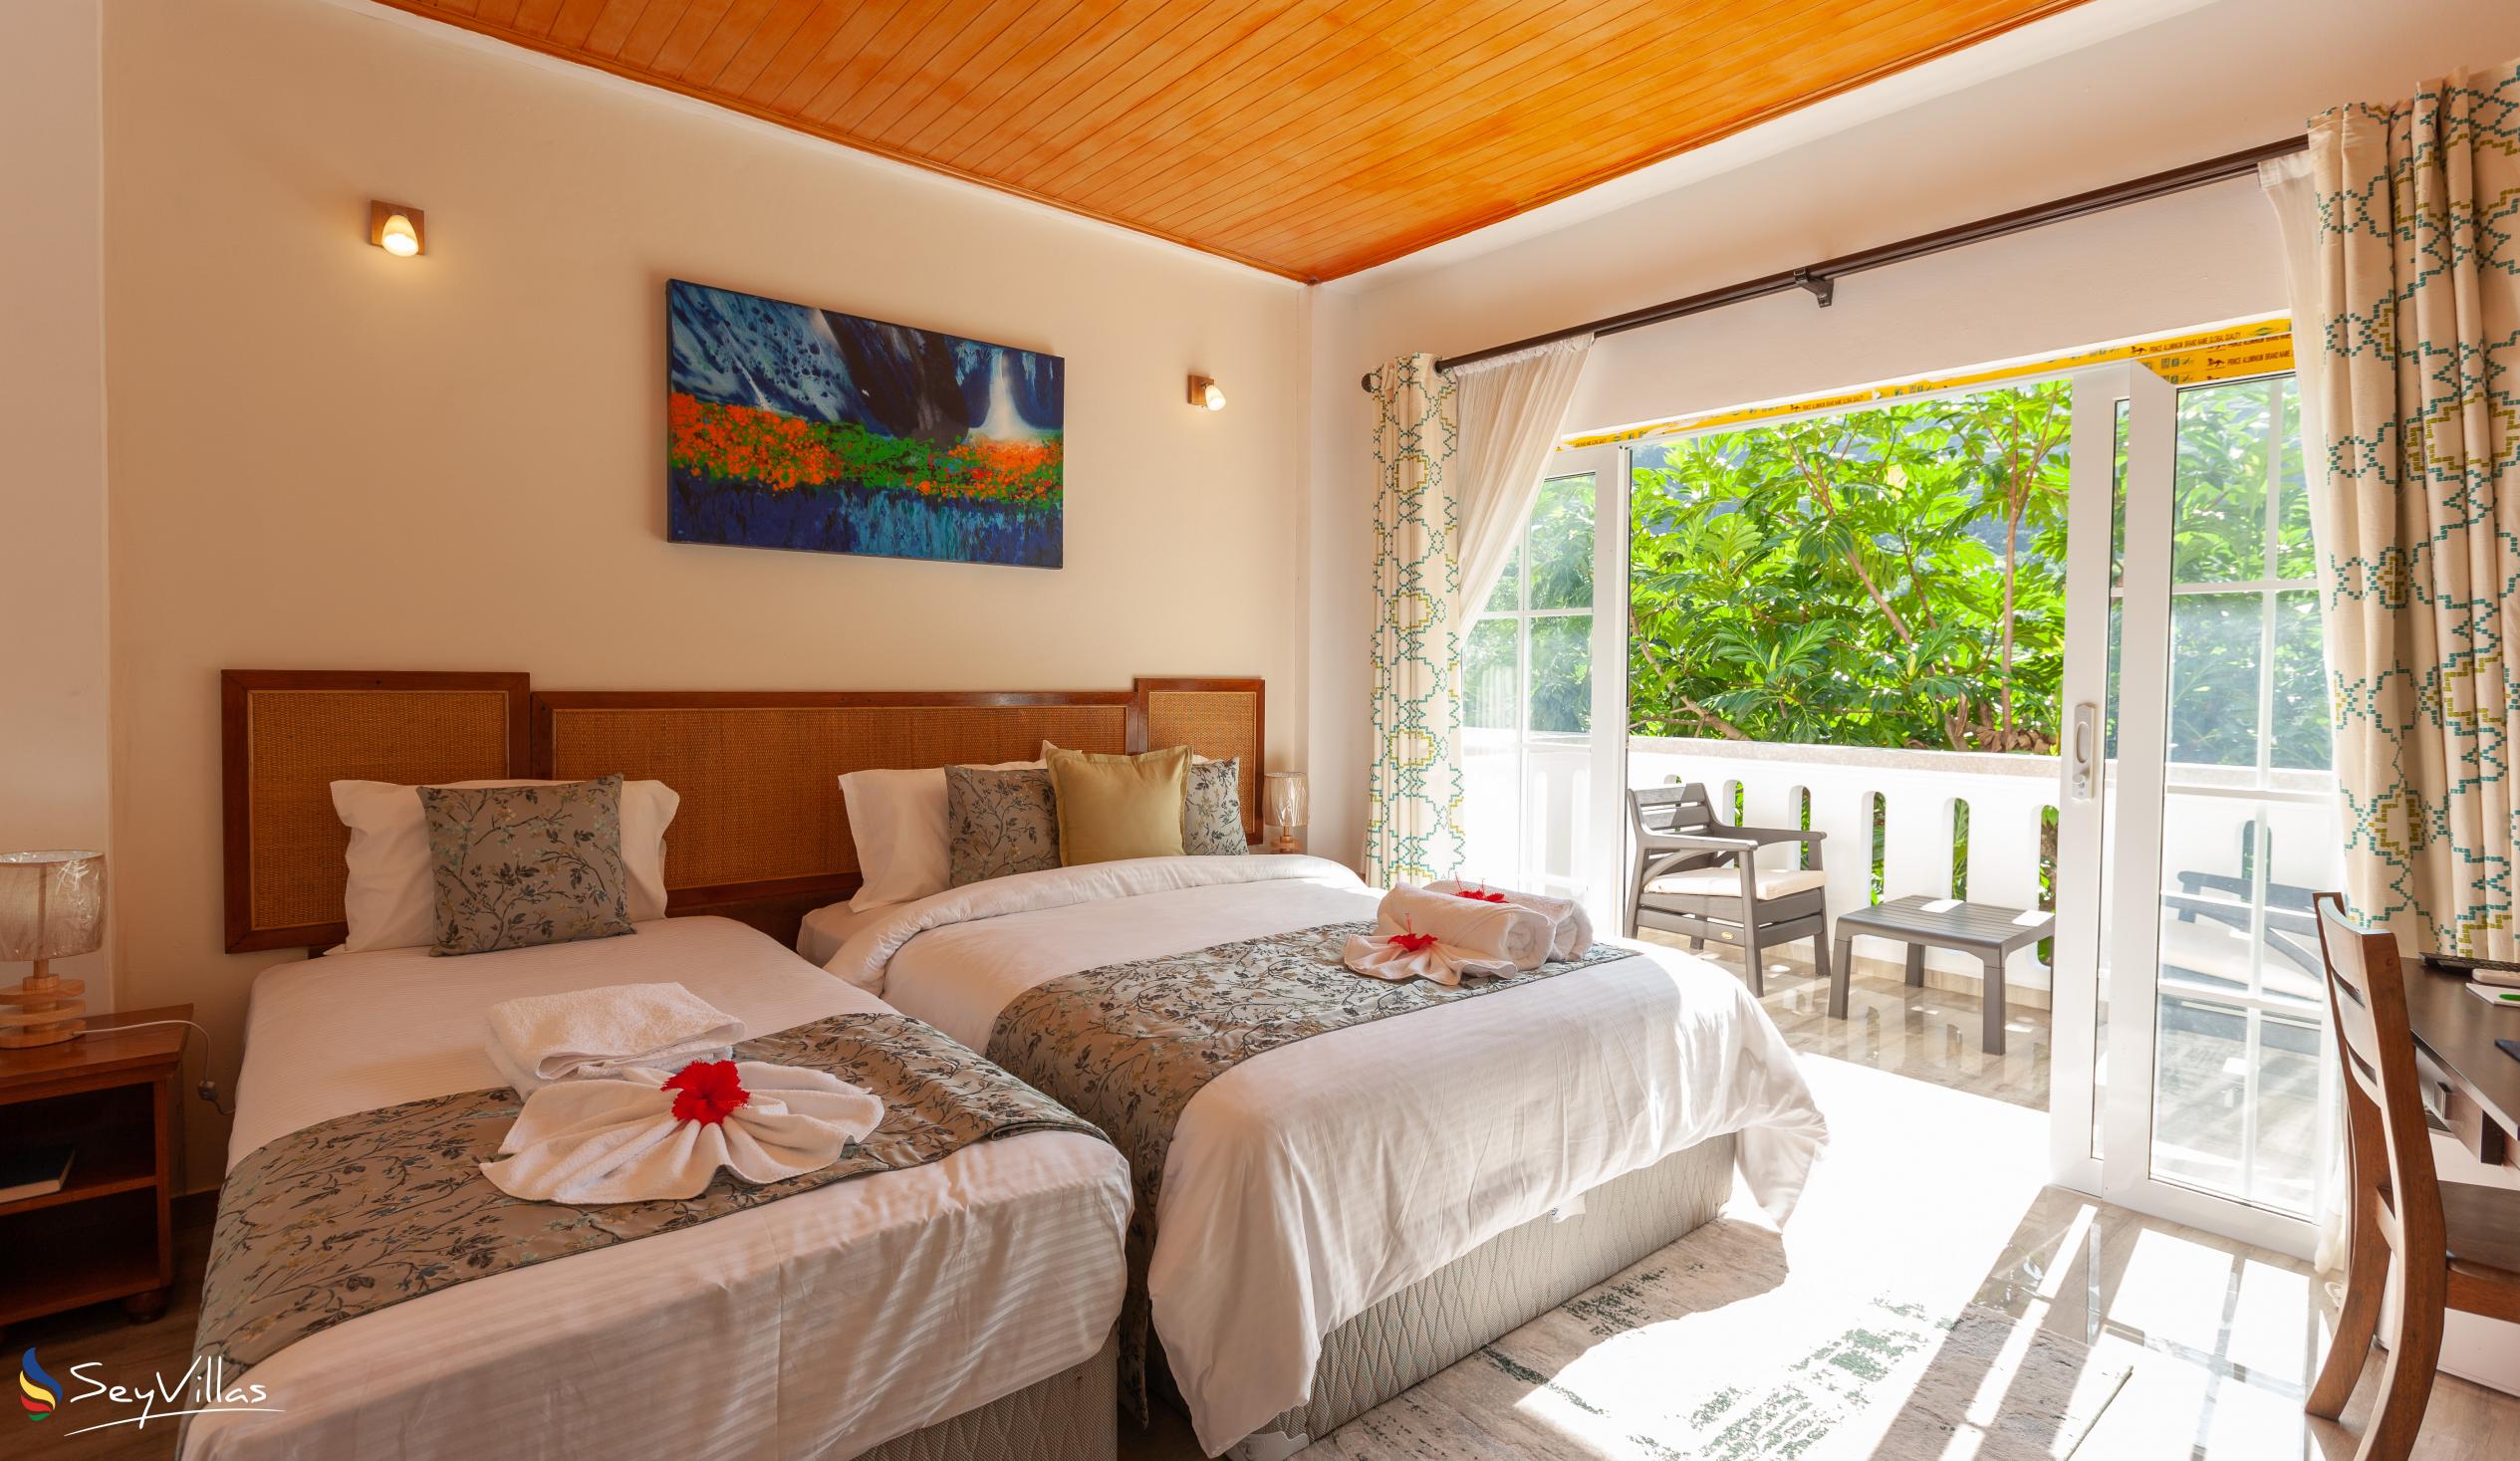 Photo 26: Mountain View Hotel - Family Room - La Digue (Seychelles)